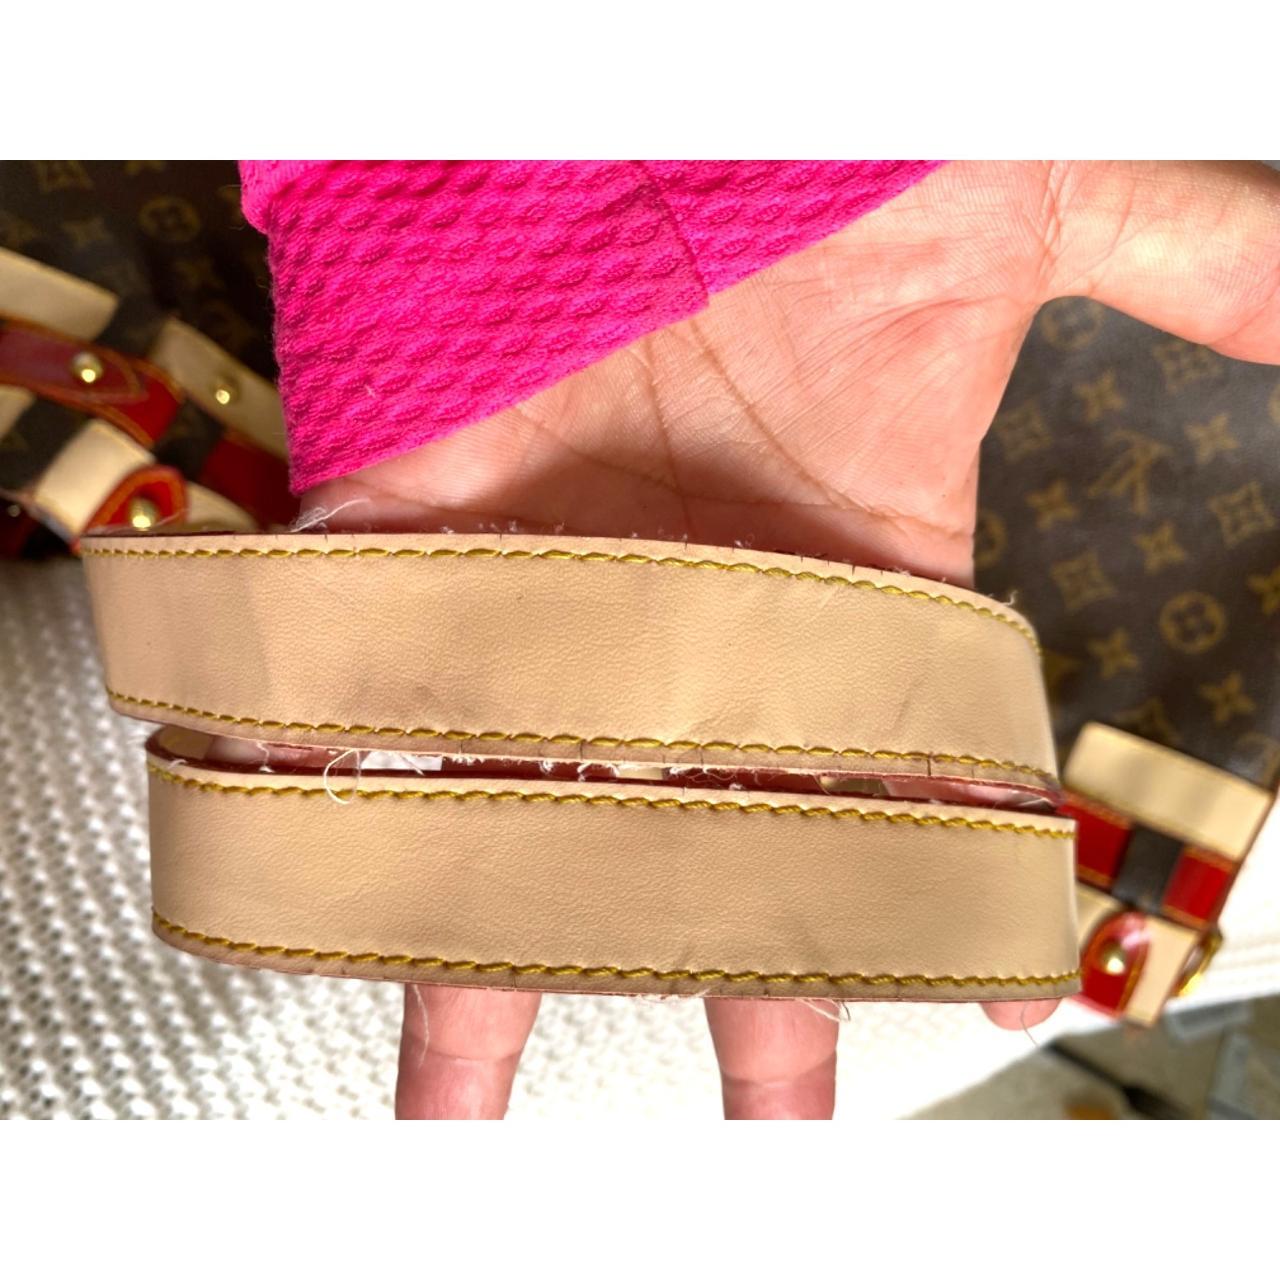 A LOUIS VUITTON RUBIS SALINA PM BAG, with double top handles, natural  leather trim and red patent cr